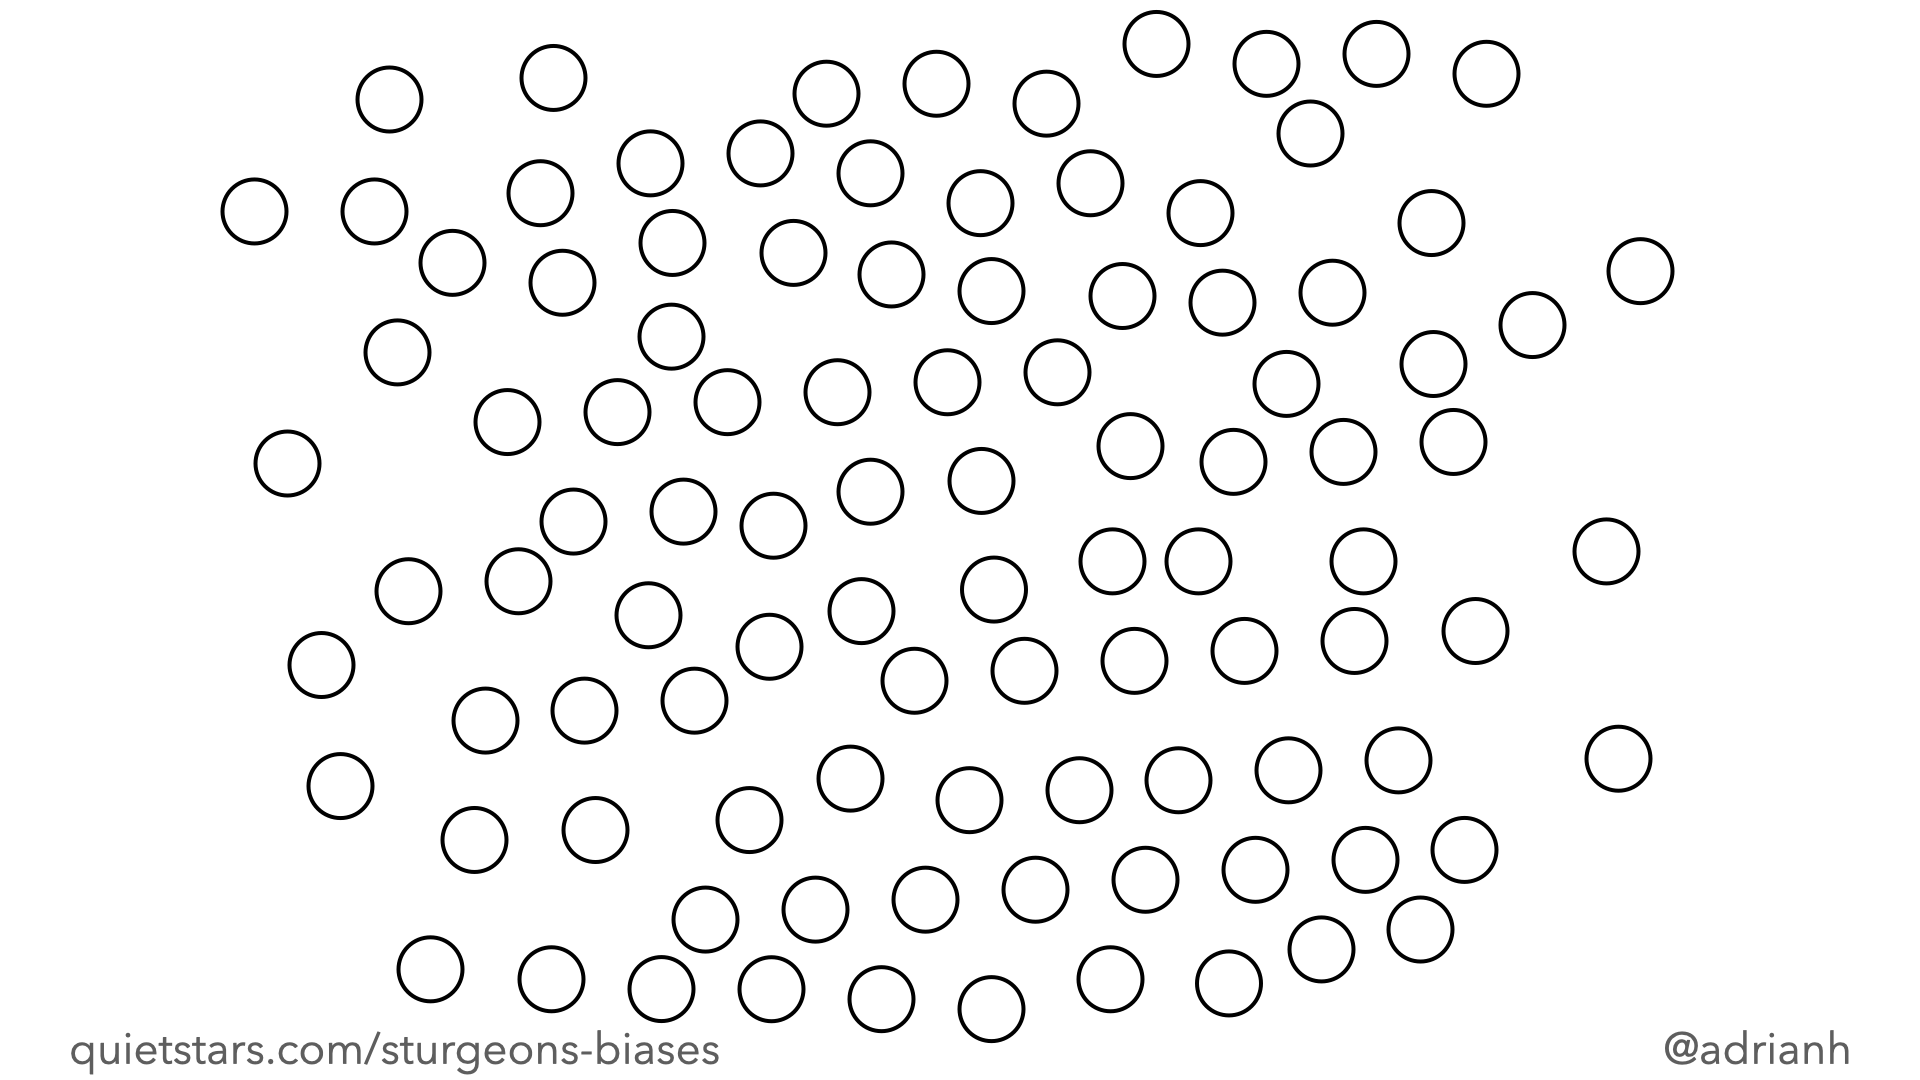 One hundred circles, representing one hundred people, randomly spread.